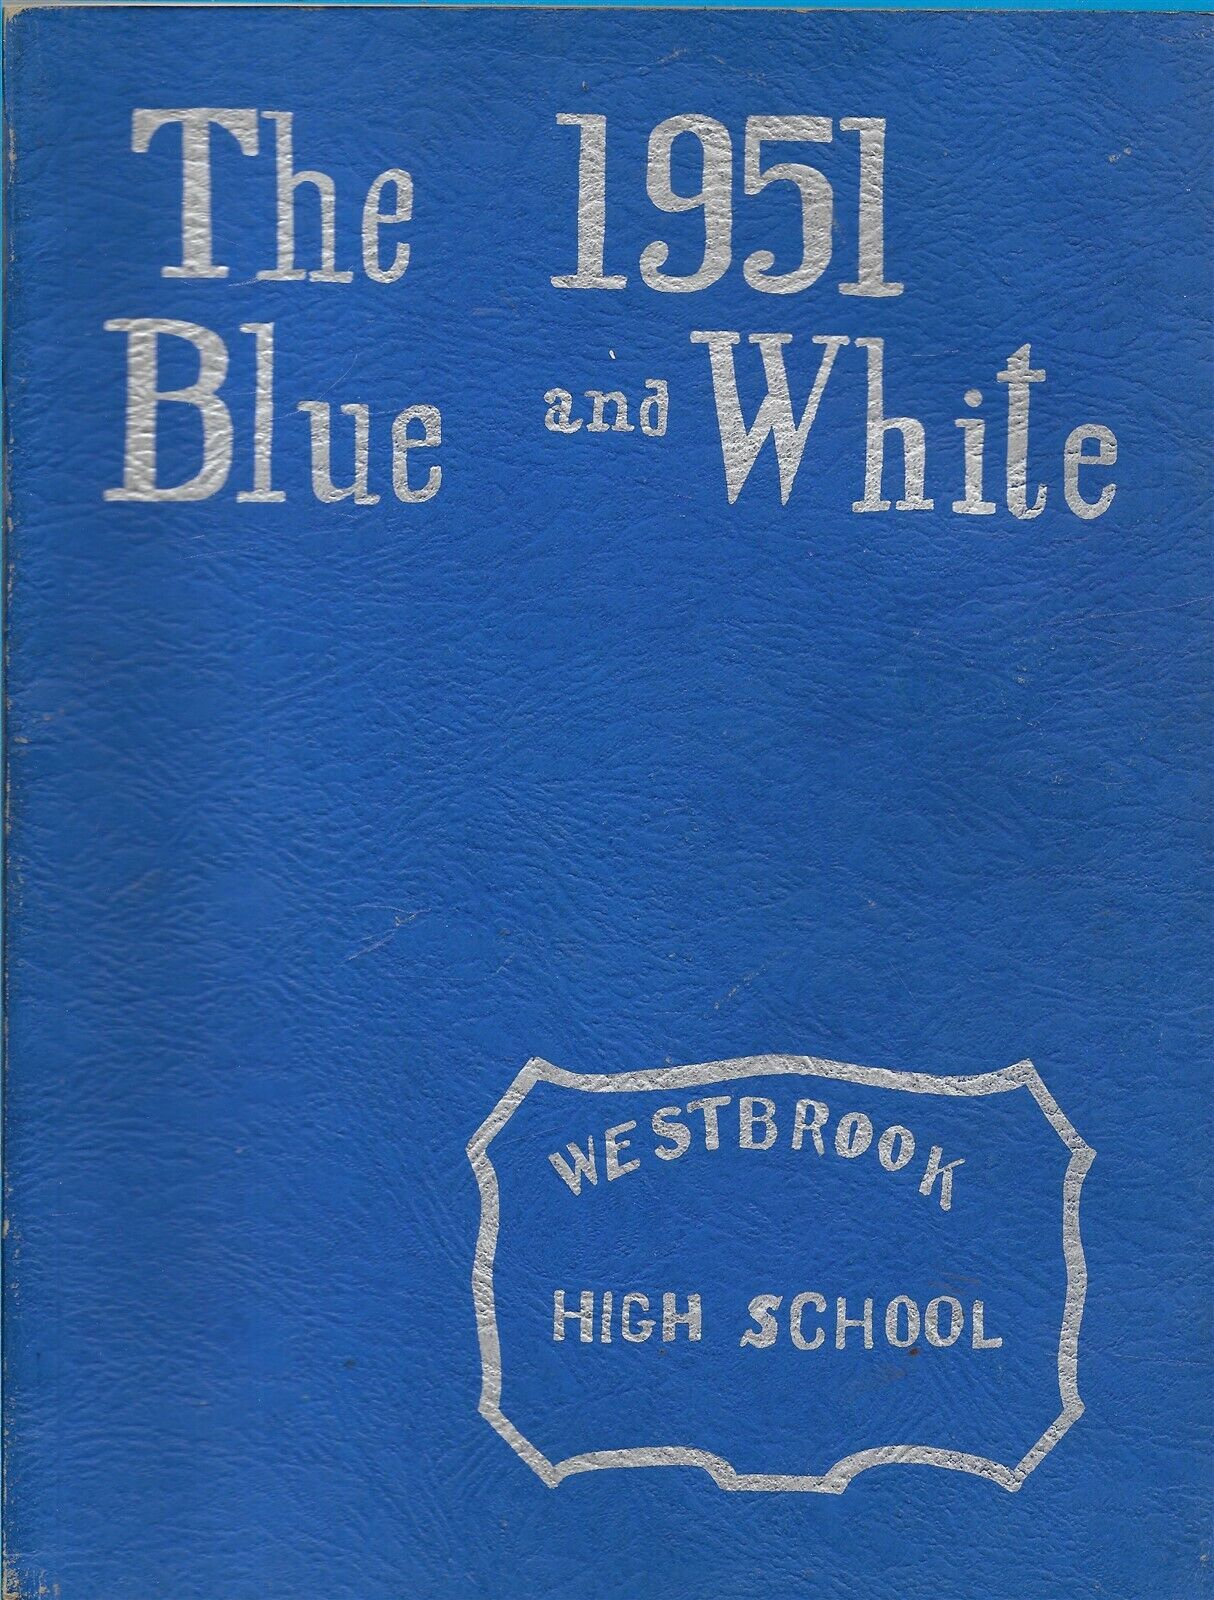 Yearbook Westbrook High School Westbrook, Maine Blue And White 1951